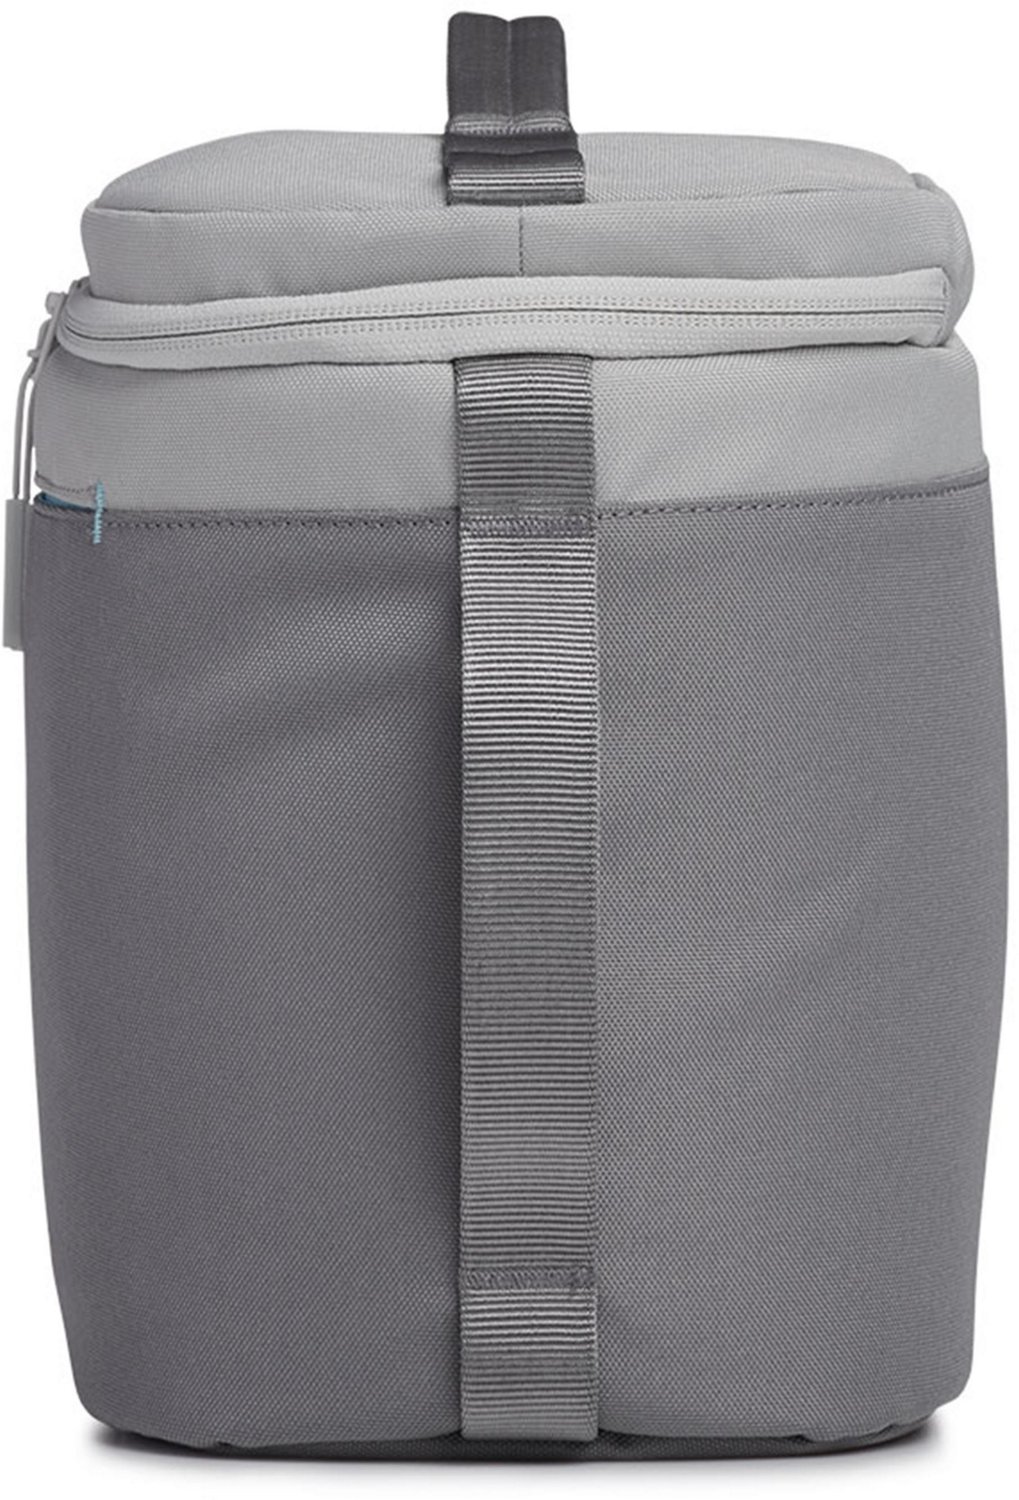 Hydro Flask Insulated Lunch Bag - 5L - Alabama Outdoors